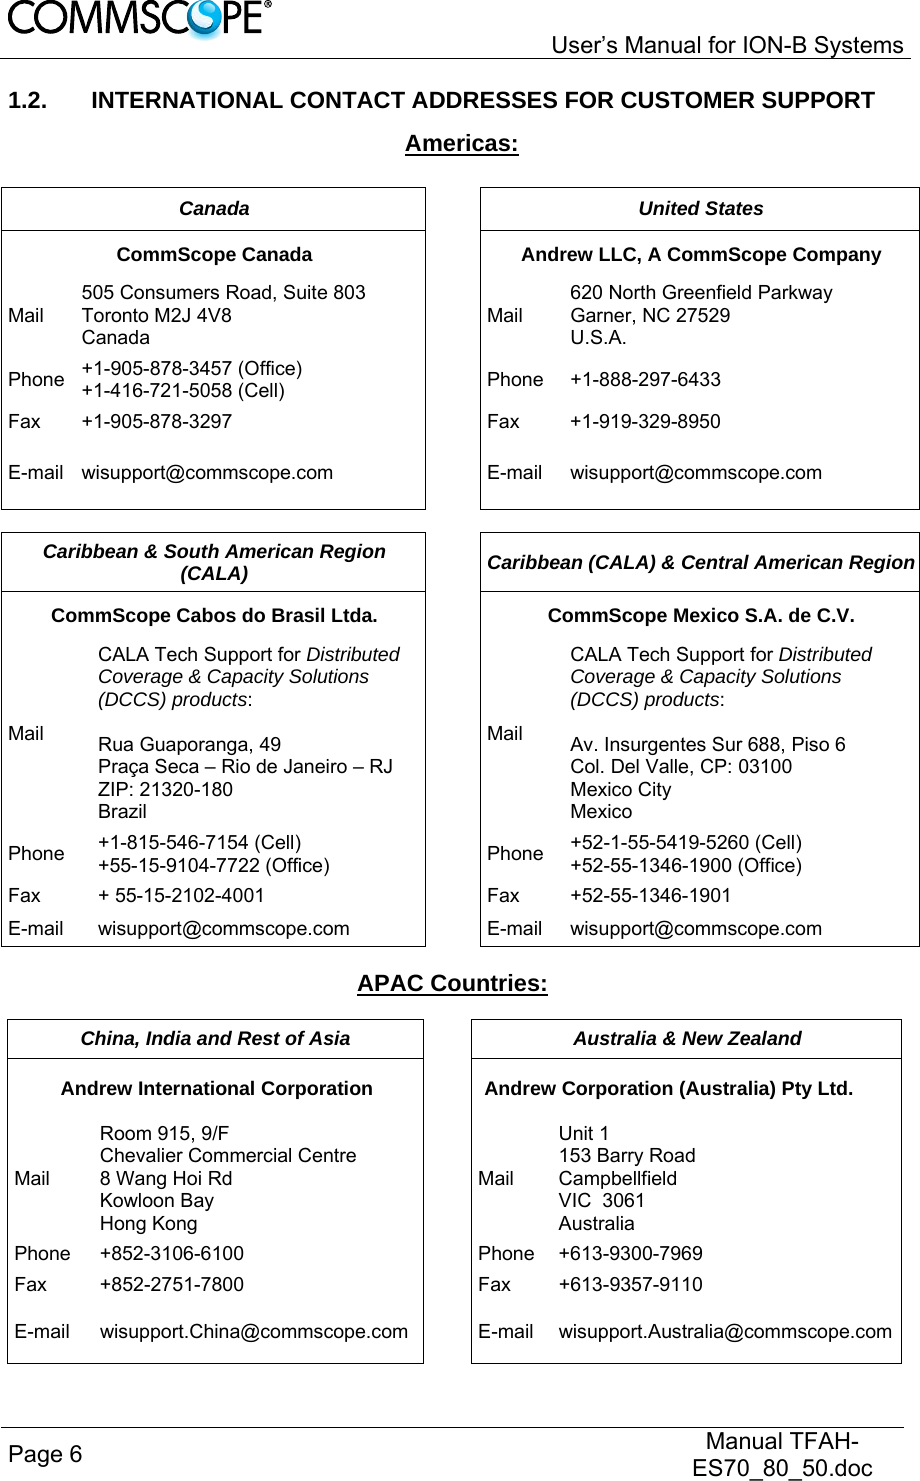   User’s Manual for ION-B Systems Page 6   Manual TFAH-ES70_80_50.doc  1.2.  INTERNATIONAL CONTACT ADDRESSES FOR CUSTOMER SUPPORT Americas:  Canada  United States CommScope Canada  Andrew LLC, A CommScope Company Mail 505 Consumers Road, Suite 803  Toronto M2J 4V8  Canada Mail 620 North Greenfield Parkway Garner, NC 27529 U.S.A. Phone  +1-905-878-3457 (Office) +1-416-721-5058 (Cell) Phone +1-888-297-6433 Fax +1-905-878-3297  Fax  +1-919-329-8950 E-mail wisupport@commscope.com  E-mail  wisupport@commscope.com  Caribbean &amp; South American Region (CALA)  Caribbean (CALA) &amp; Central American Region CommScope Cabos do Brasil Ltda.  CommScope Mexico S.A. de C.V. Mail CALA Tech Support for Distributed Coverage &amp; Capacity Solutions (DCCS) products:  Rua Guaporanga, 49 Praça Seca – Rio de Janeiro – RJ ZIP: 21320-180 Brazil Mail CALA Tech Support for Distributed Coverage &amp; Capacity Solutions (DCCS) products:  Av. Insurgentes Sur 688, Piso 6 Col. Del Valle, CP: 03100 Mexico City Mexico Phone  +1-815-546-7154 (Cell) +55-15-9104-7722 (Office)  Phone  +52-1-55-5419-5260 (Cell) +52-55-1346-1900 (Office) Fax + 55-15-2102-4001  Fax +52-55-1346-1901 E-mail wisupport@commscope.com  E-mail wisupport@commscope.com  APAC Countries:  China, India and Rest of Asia  Australia &amp; New Zealand Andrew International Corporation  Andrew Corporation (Australia) Pty Ltd. Mail Room 915, 9/F  Chevalier Commercial Centre 8 Wang Hoi Rd Kowloon Bay  Hong Kong Mail Unit 1 153 Barry Road Campbellfield  VIC  3061 Australia Phone +852-3106-6100  Phone +613-9300-7969 Fax +852-2751-7800  Fax +613-9357-9110 E-mail wisupport.China@commscope.com E-mail wisupport.Australia@commscope.com